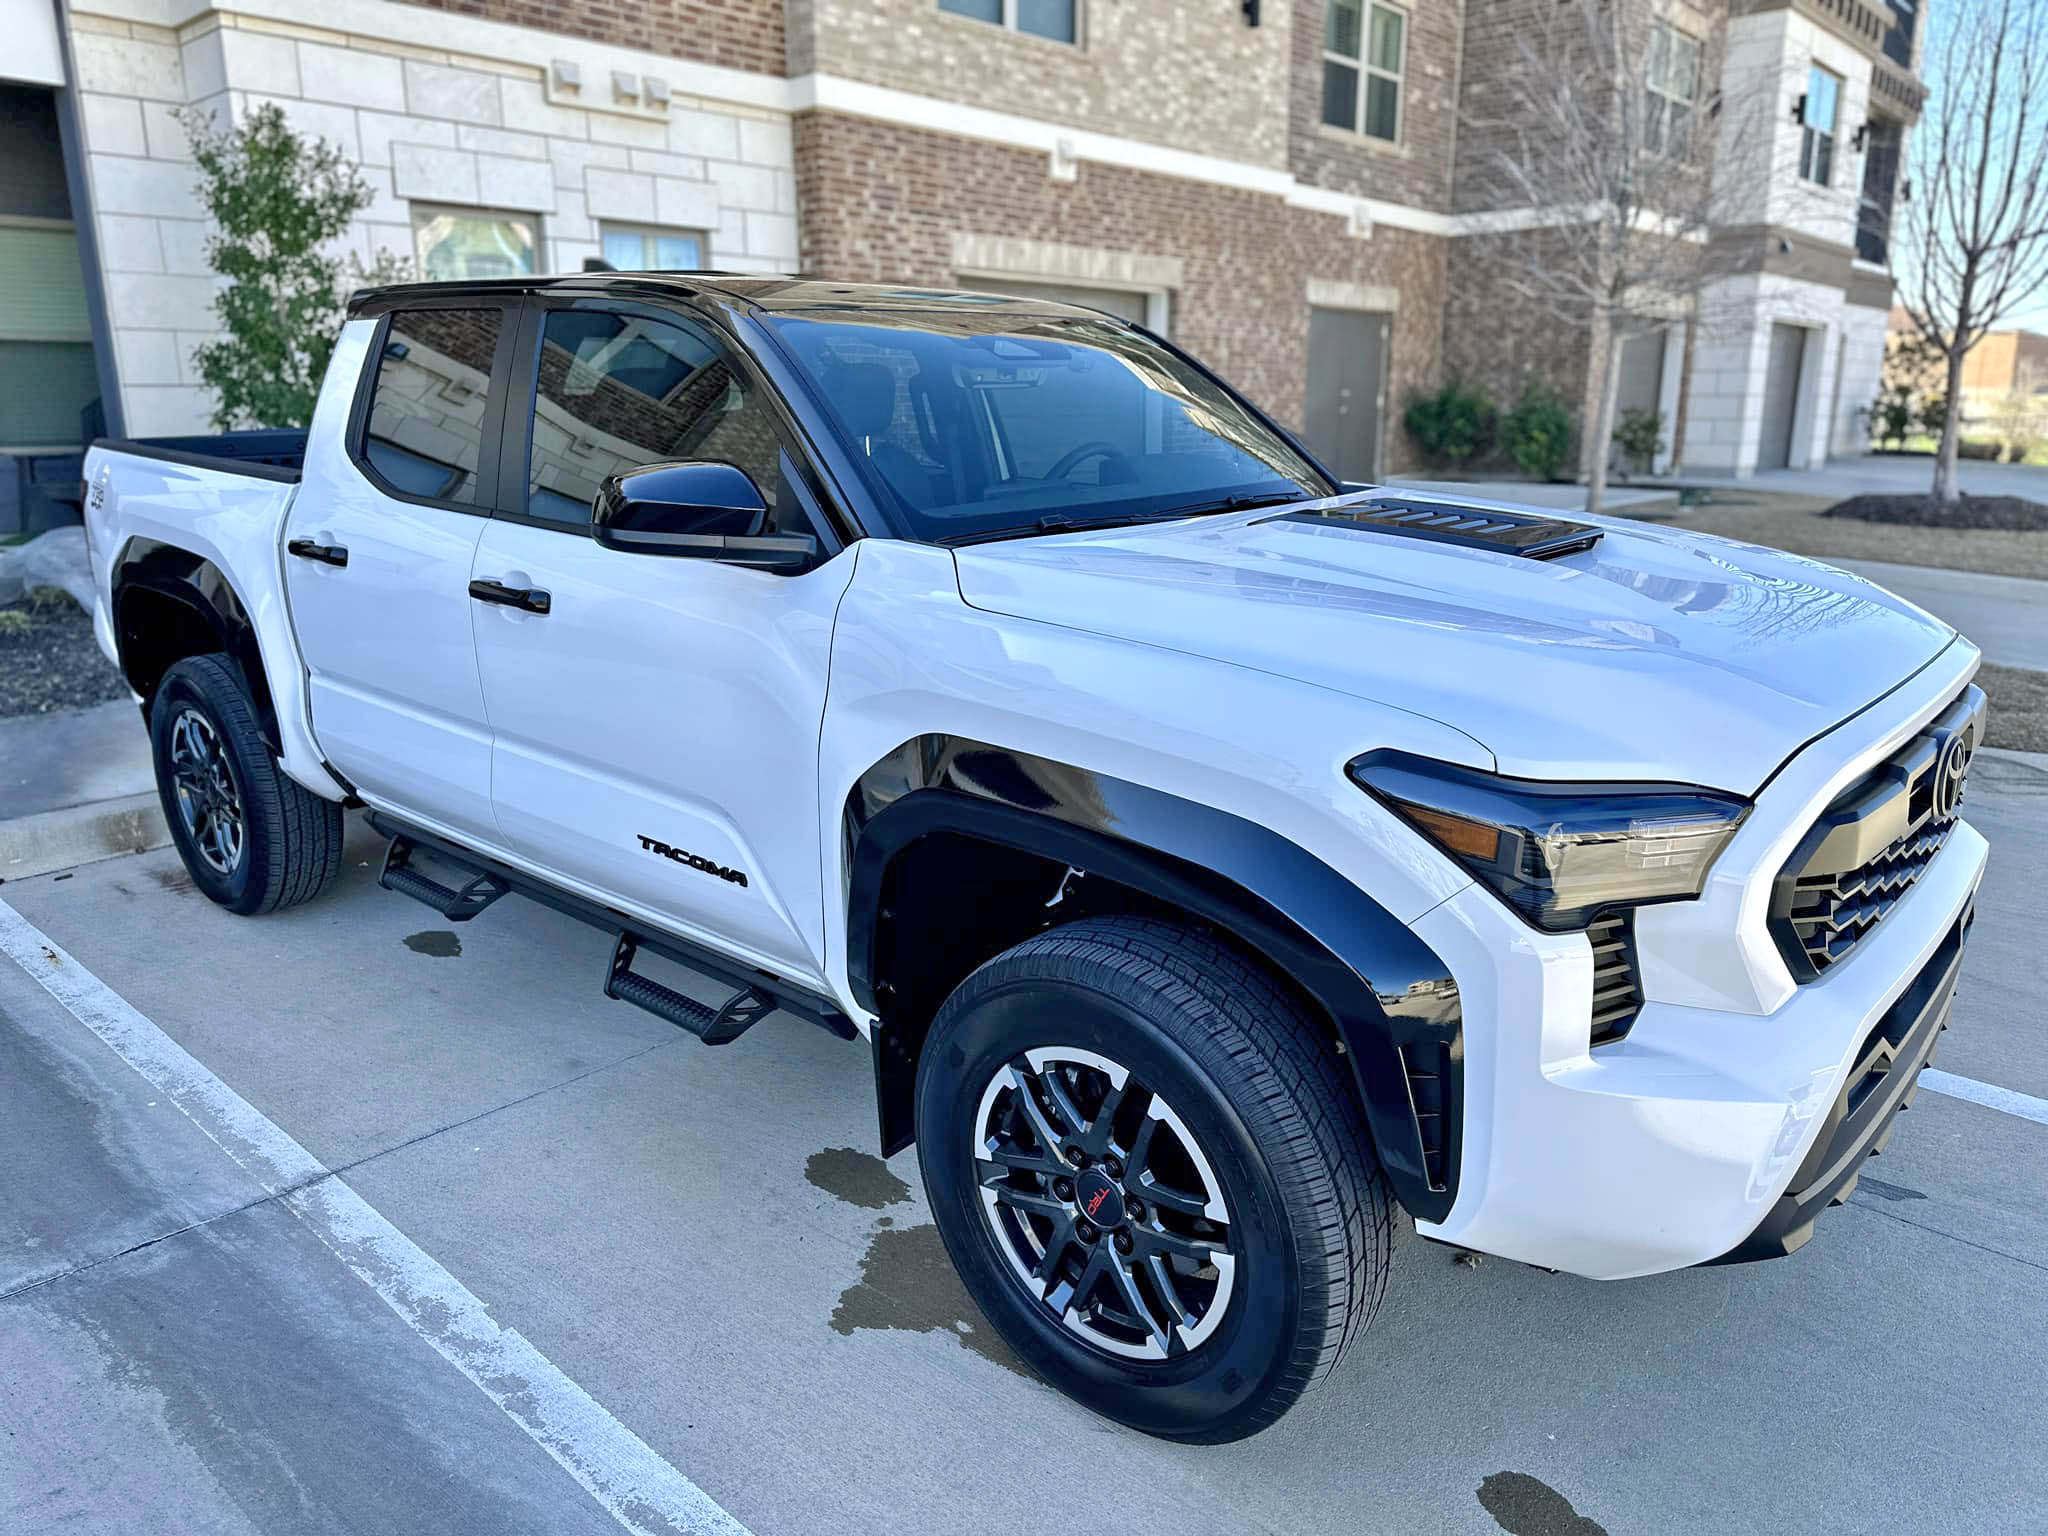 Roof Wrap + Fender Flare Wrapped in Black for a 2024 TRD PRO look 1.jpg